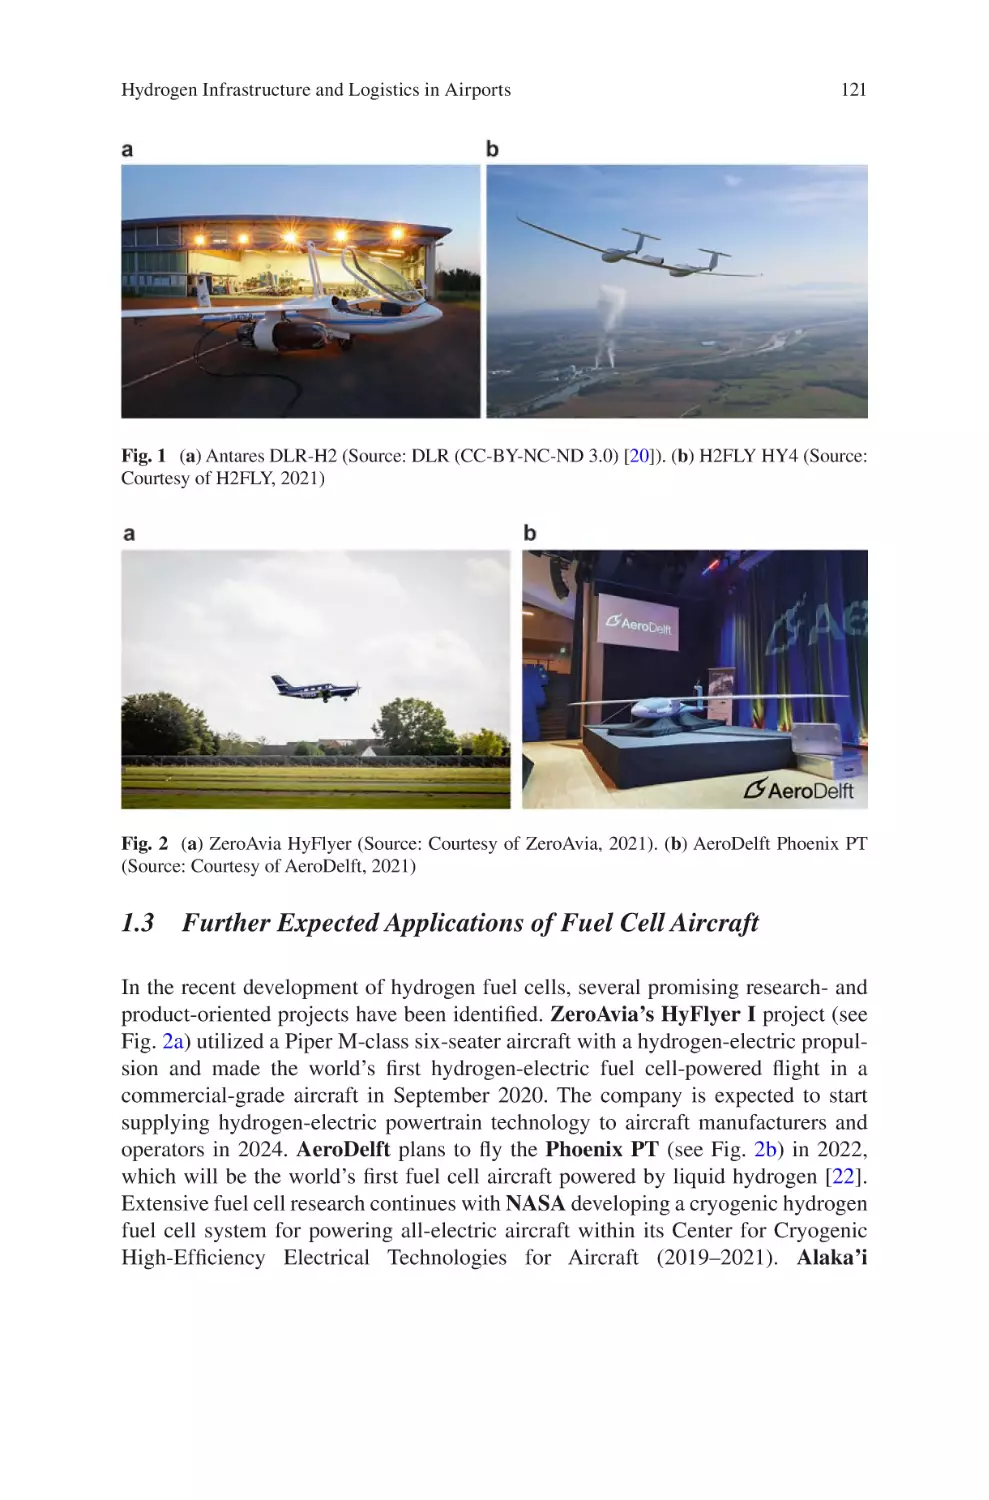 1.3 Further Expected Applications of Fuel Cell Aircraft